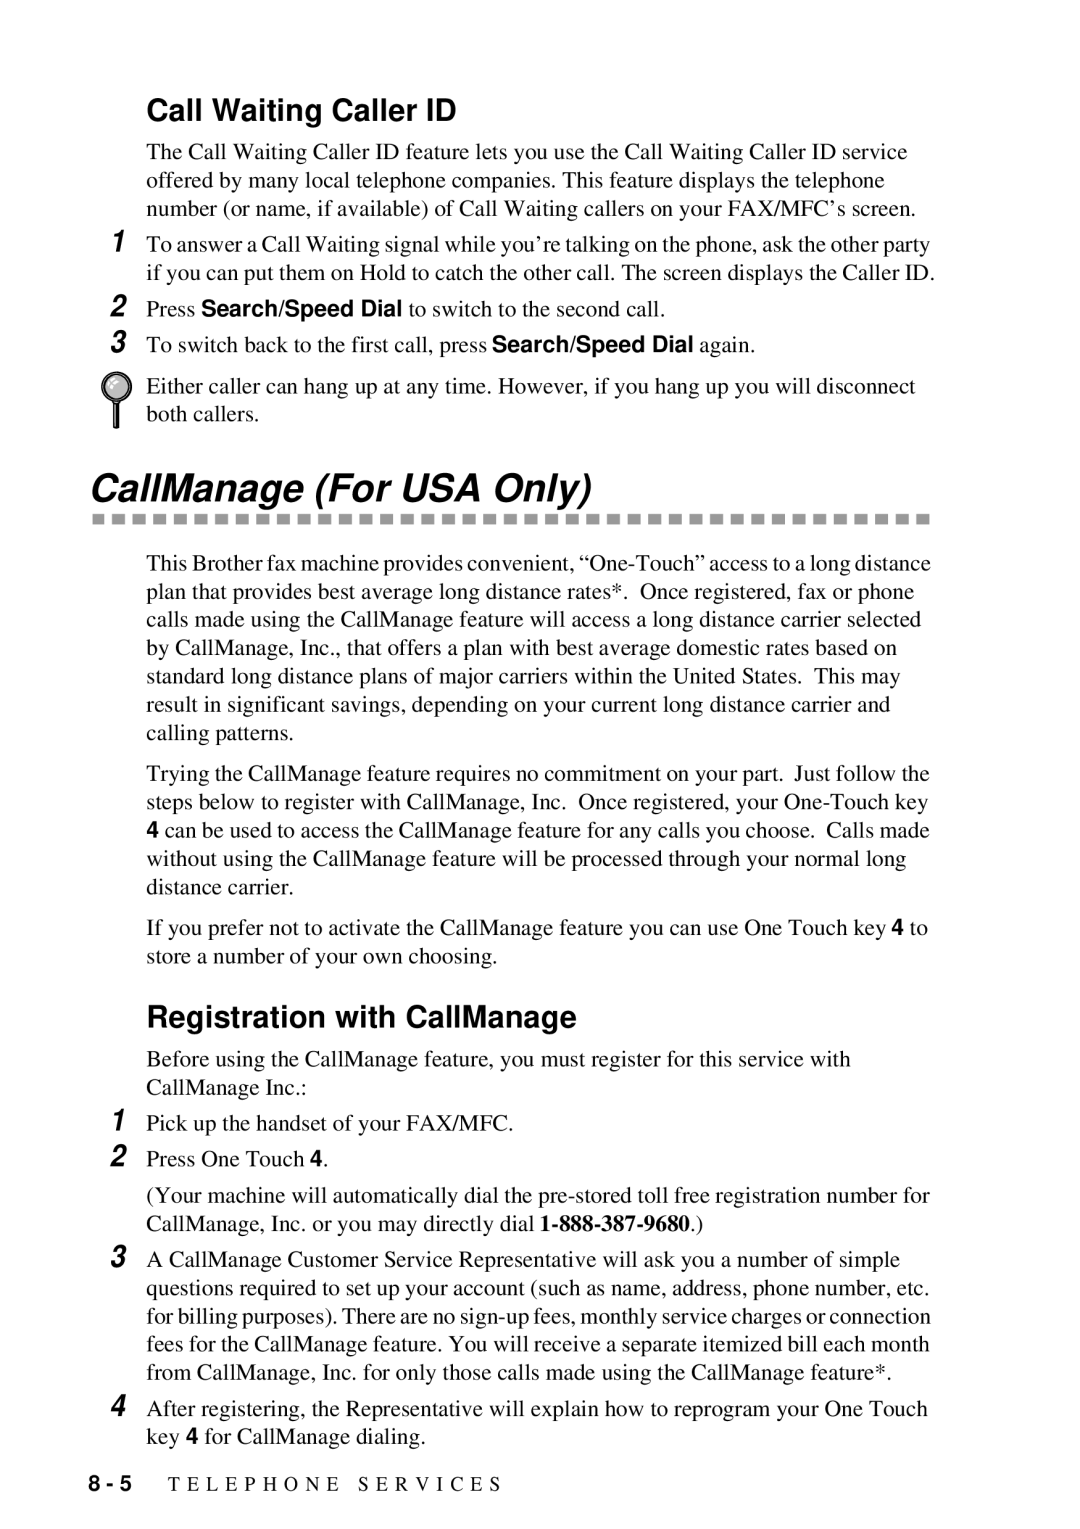 Brother FAX 580MC owner manual CallManage For USA Only, Call Waiting Caller ID, Registration with CallManage 